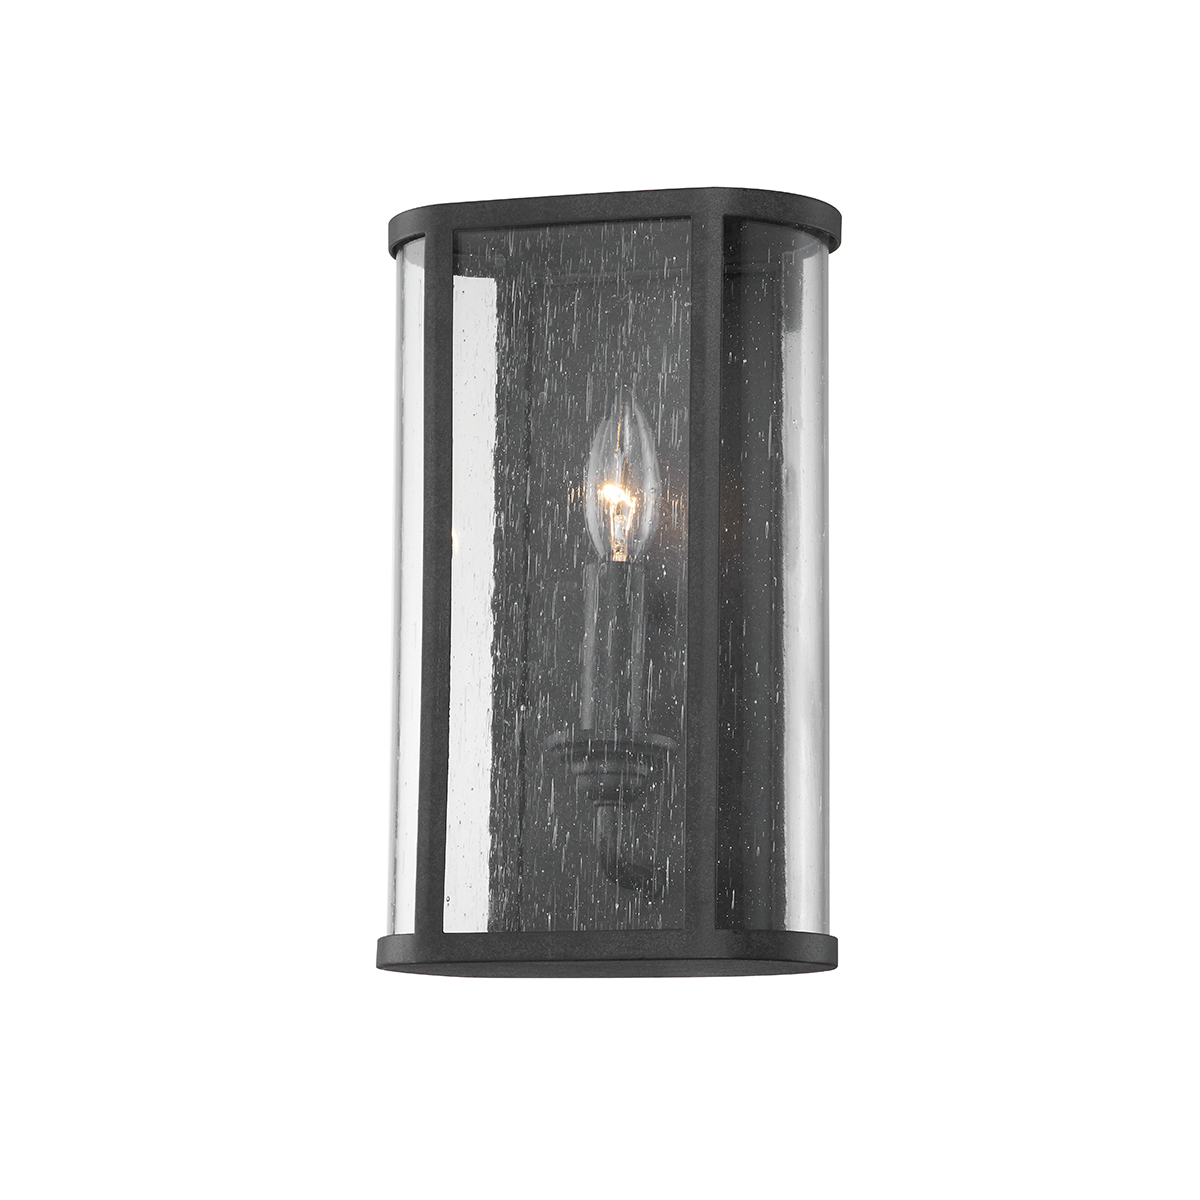 Troy Lighting Chace Wall Sconce Wall Sconce Troy Lighting FORGED IRON 7.5x7.5x12 